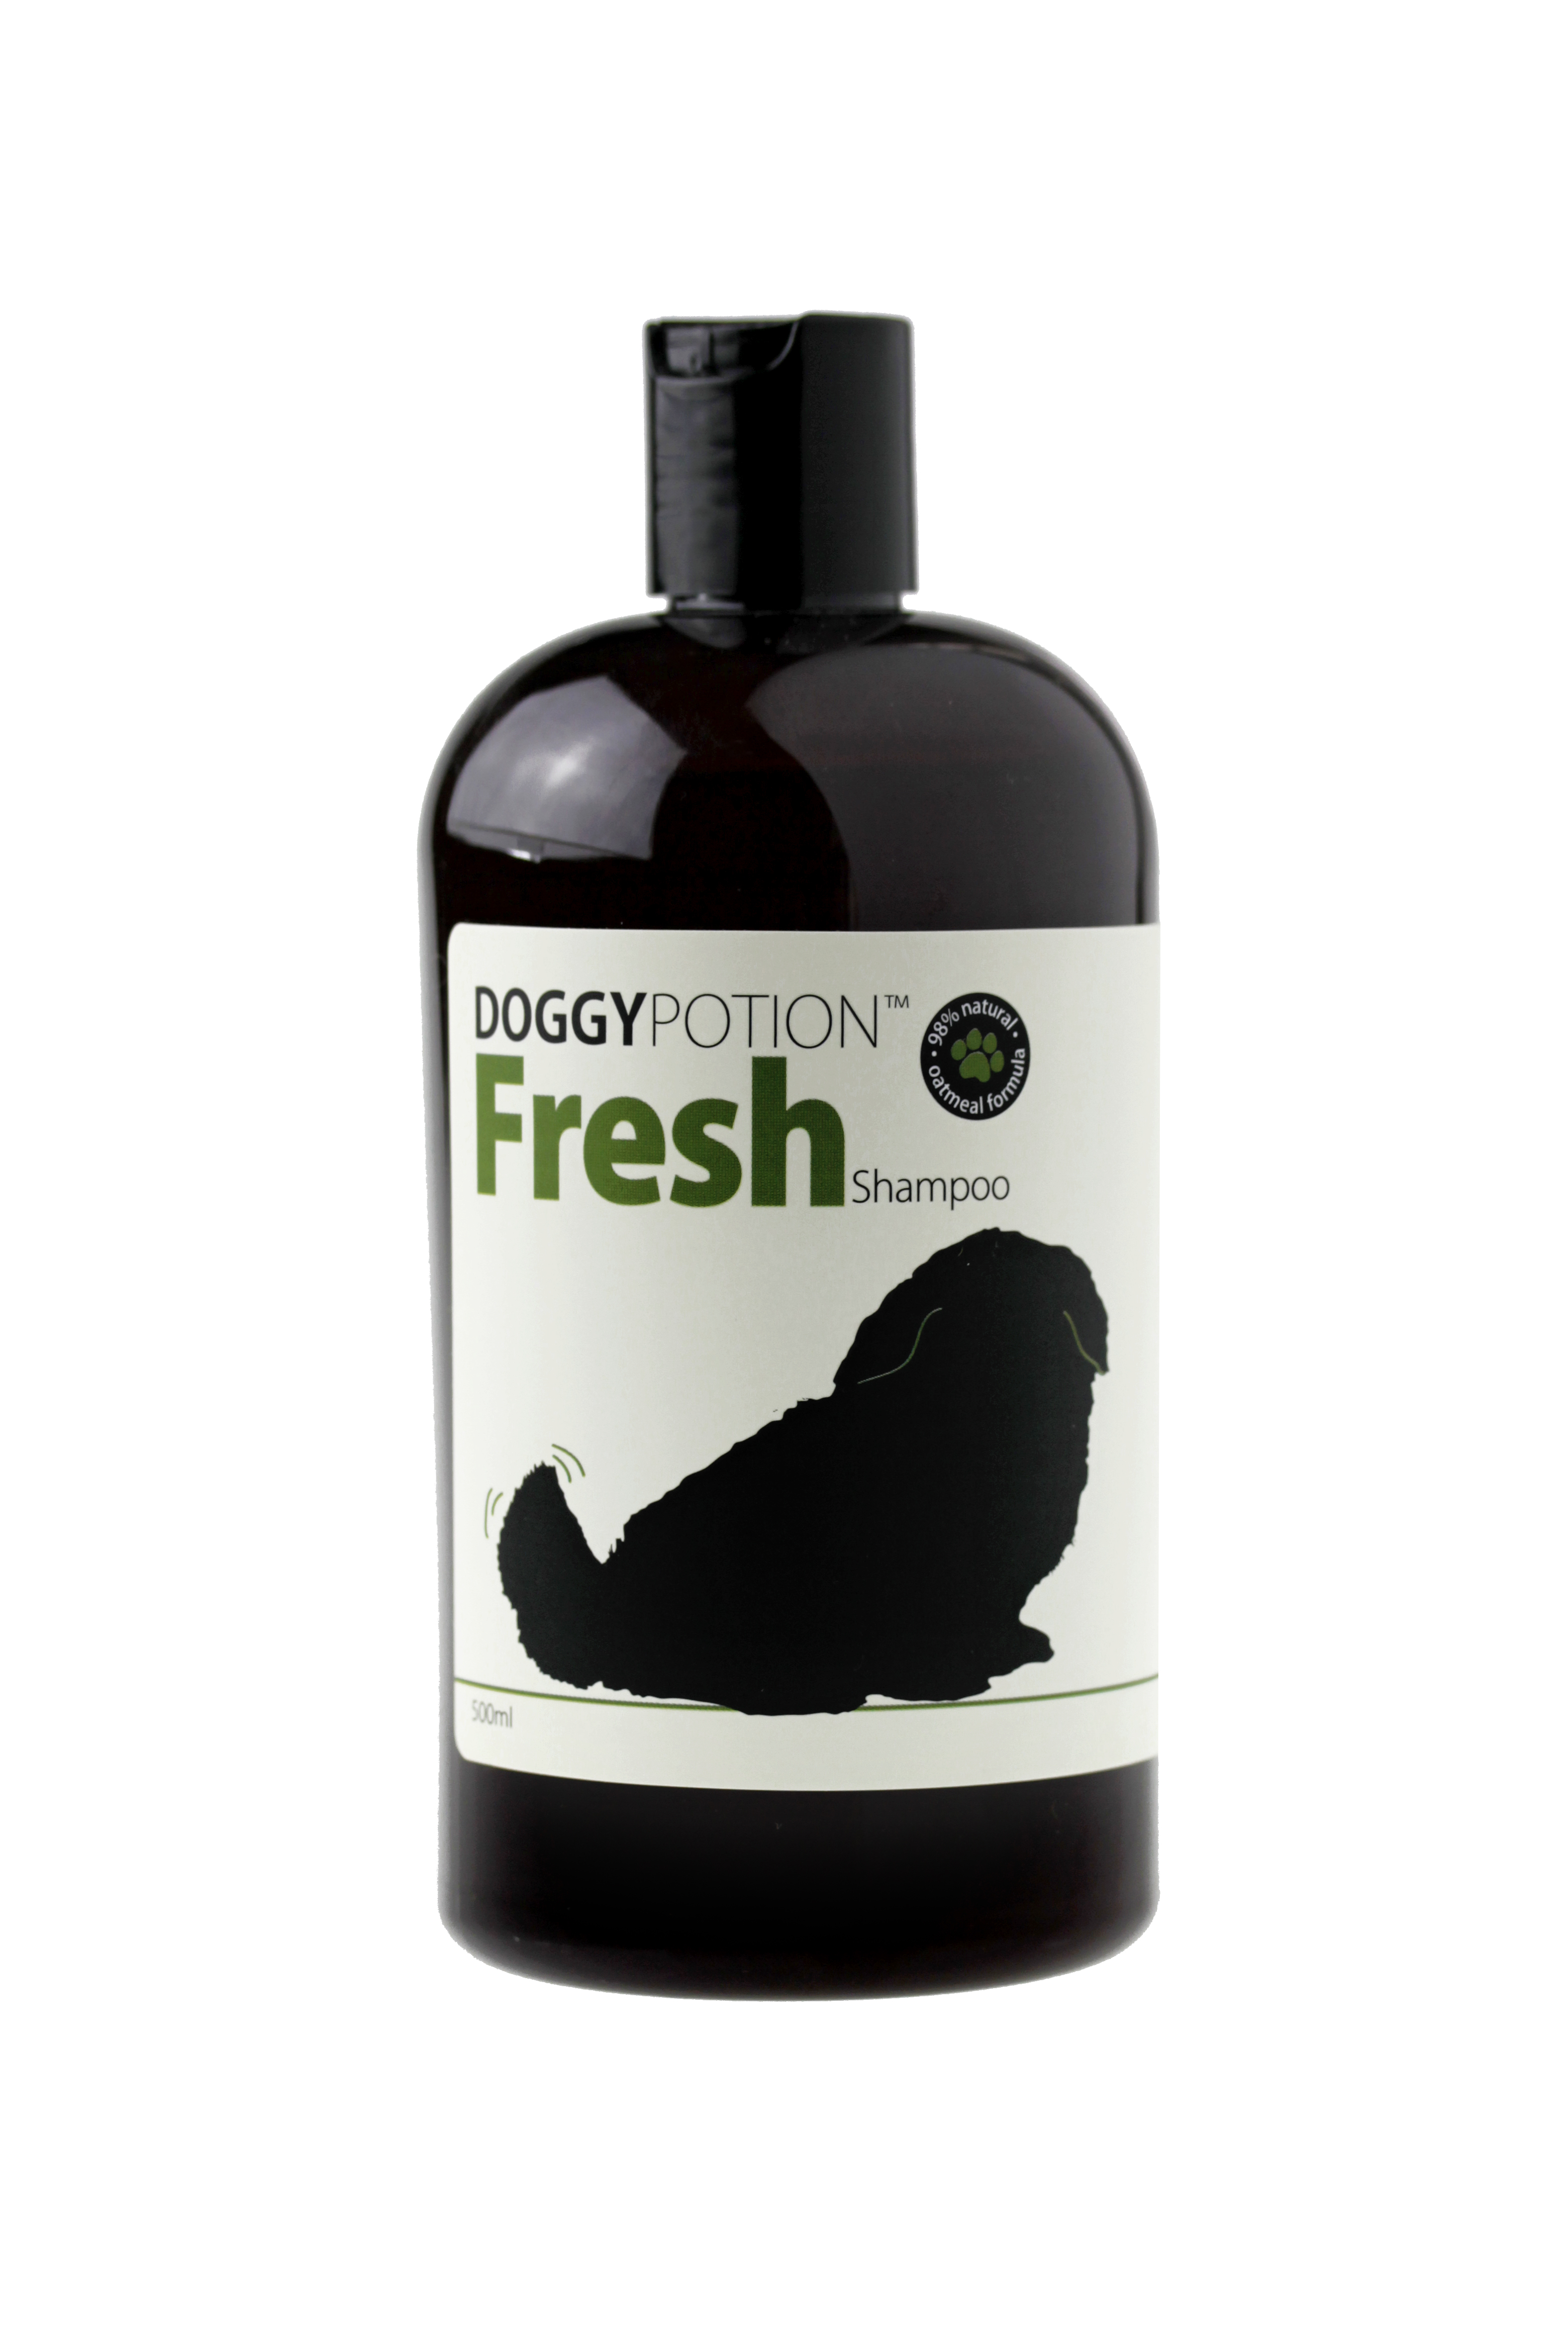 Doggy Potion Colloidal Oatmeal Shampoo and Conditioner